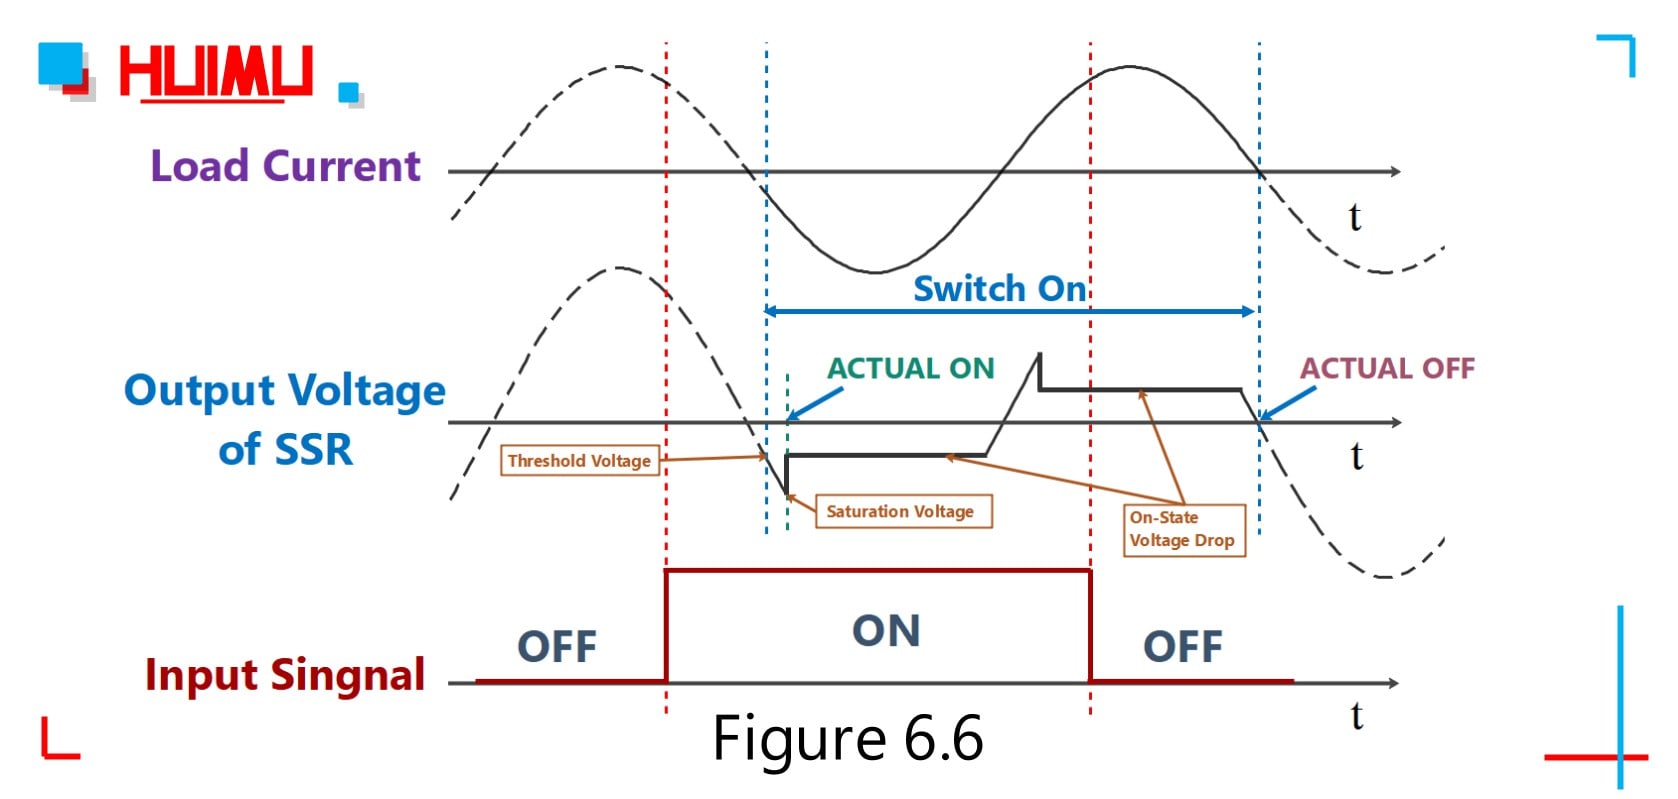 I/O waveform of the zero-crossing AC solid state relays